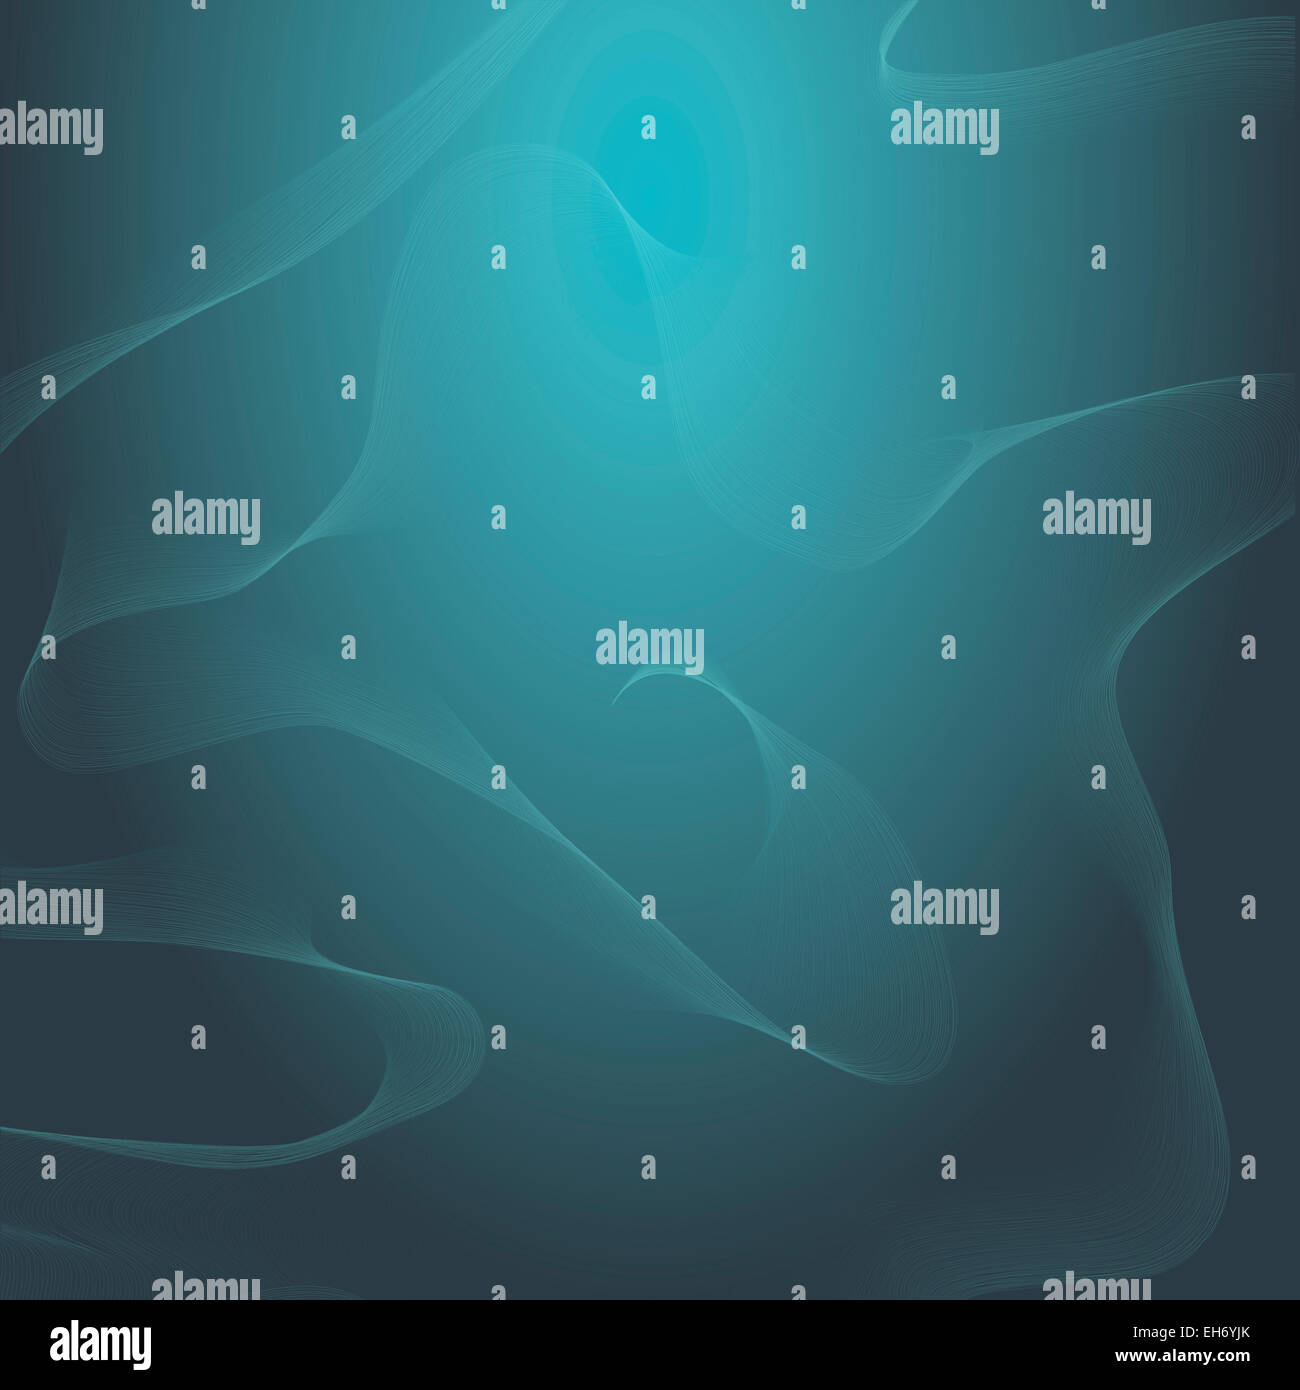 Abstract geometrical background with swirls against dark industrial background Stock Photo